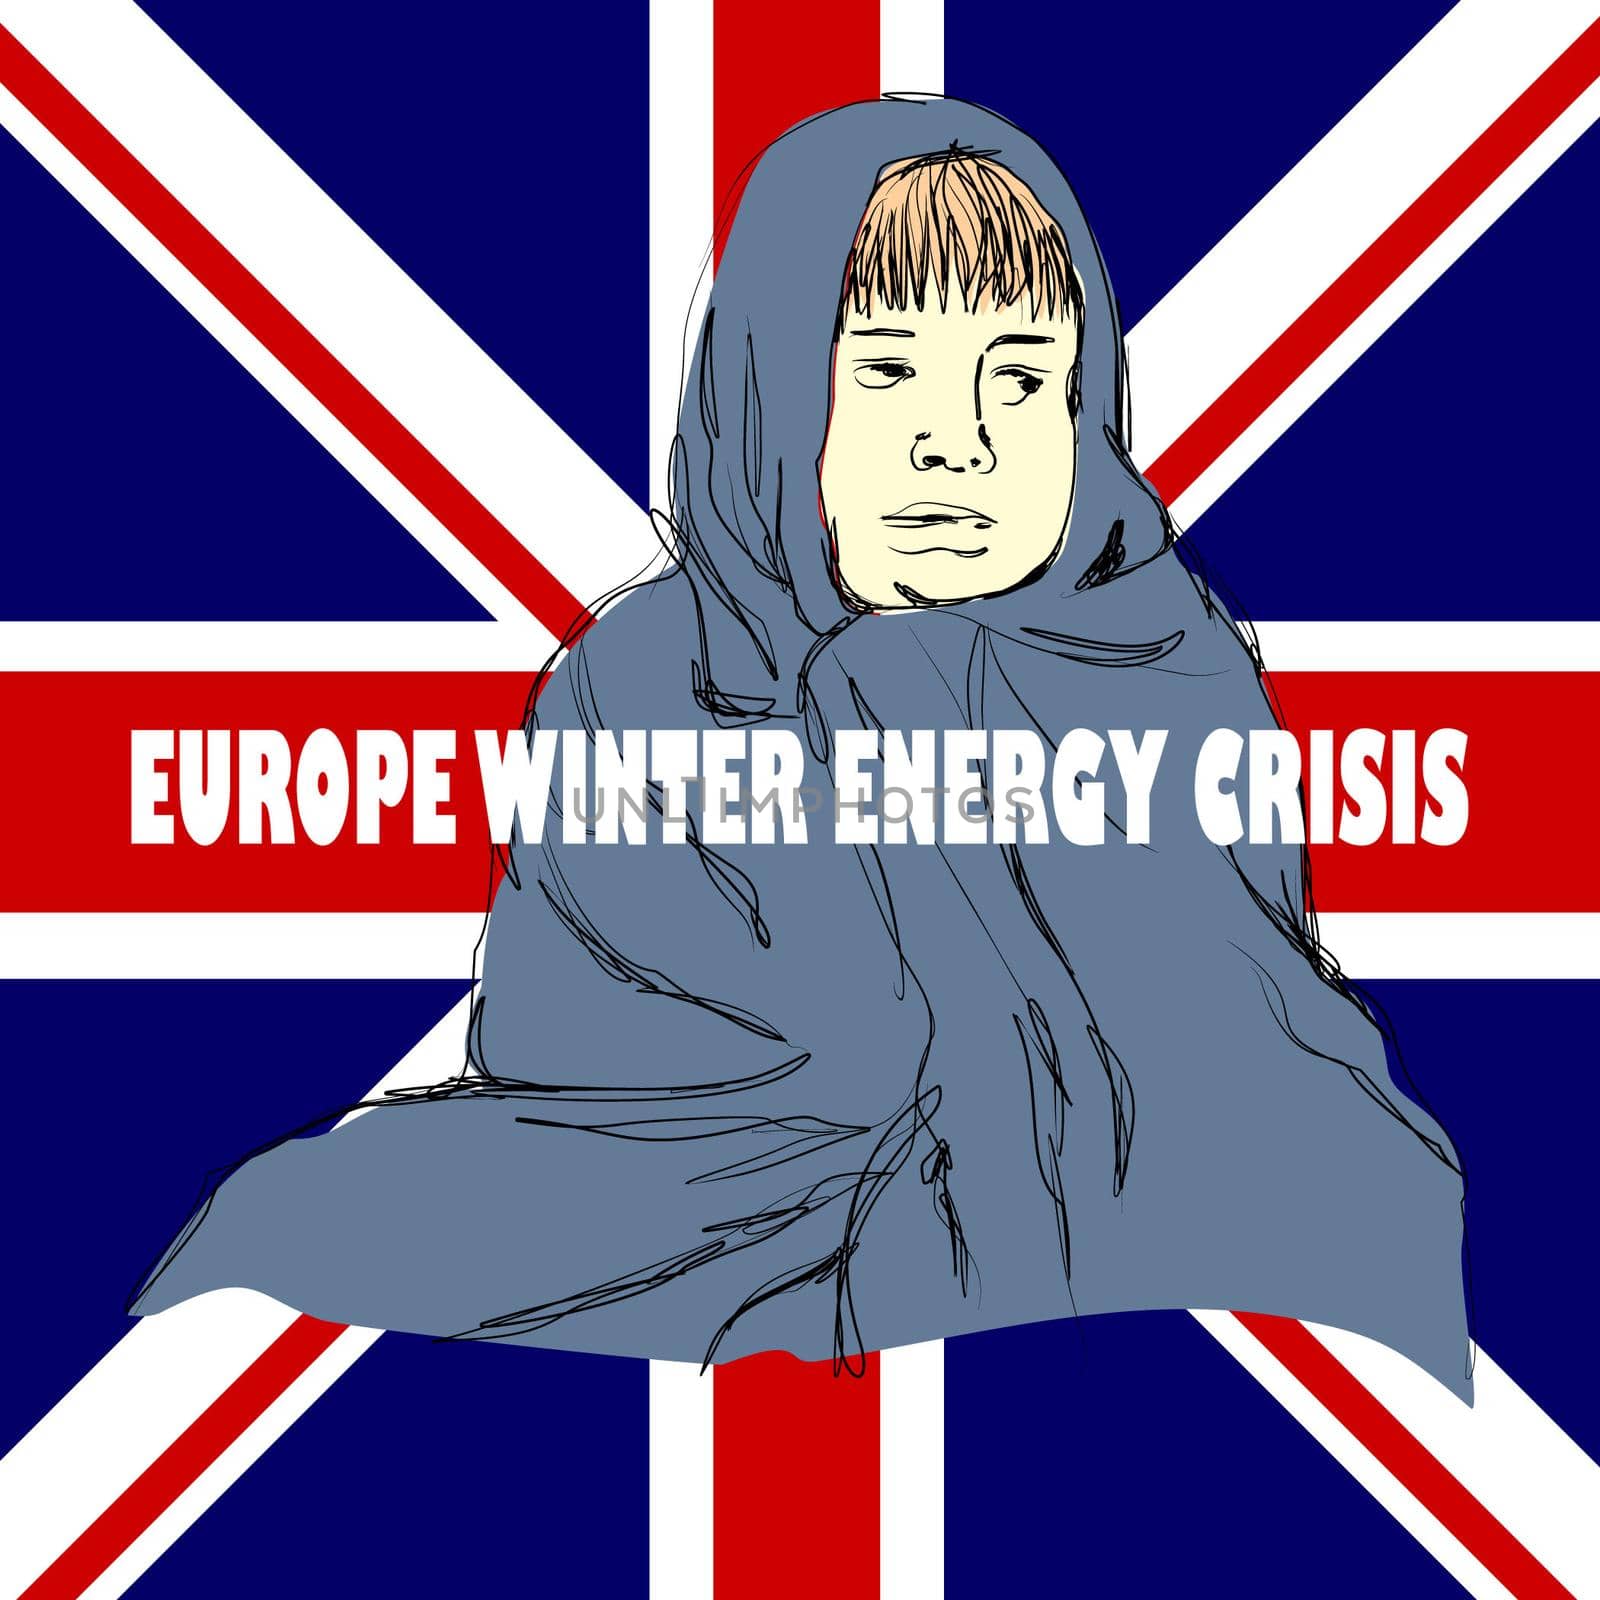 Hand drawn illustration of cold person on British flag background. useful for posters, pamphlets, wall decorations to invite people to be aware of energy that is increasingly expensive and scarce by klopo